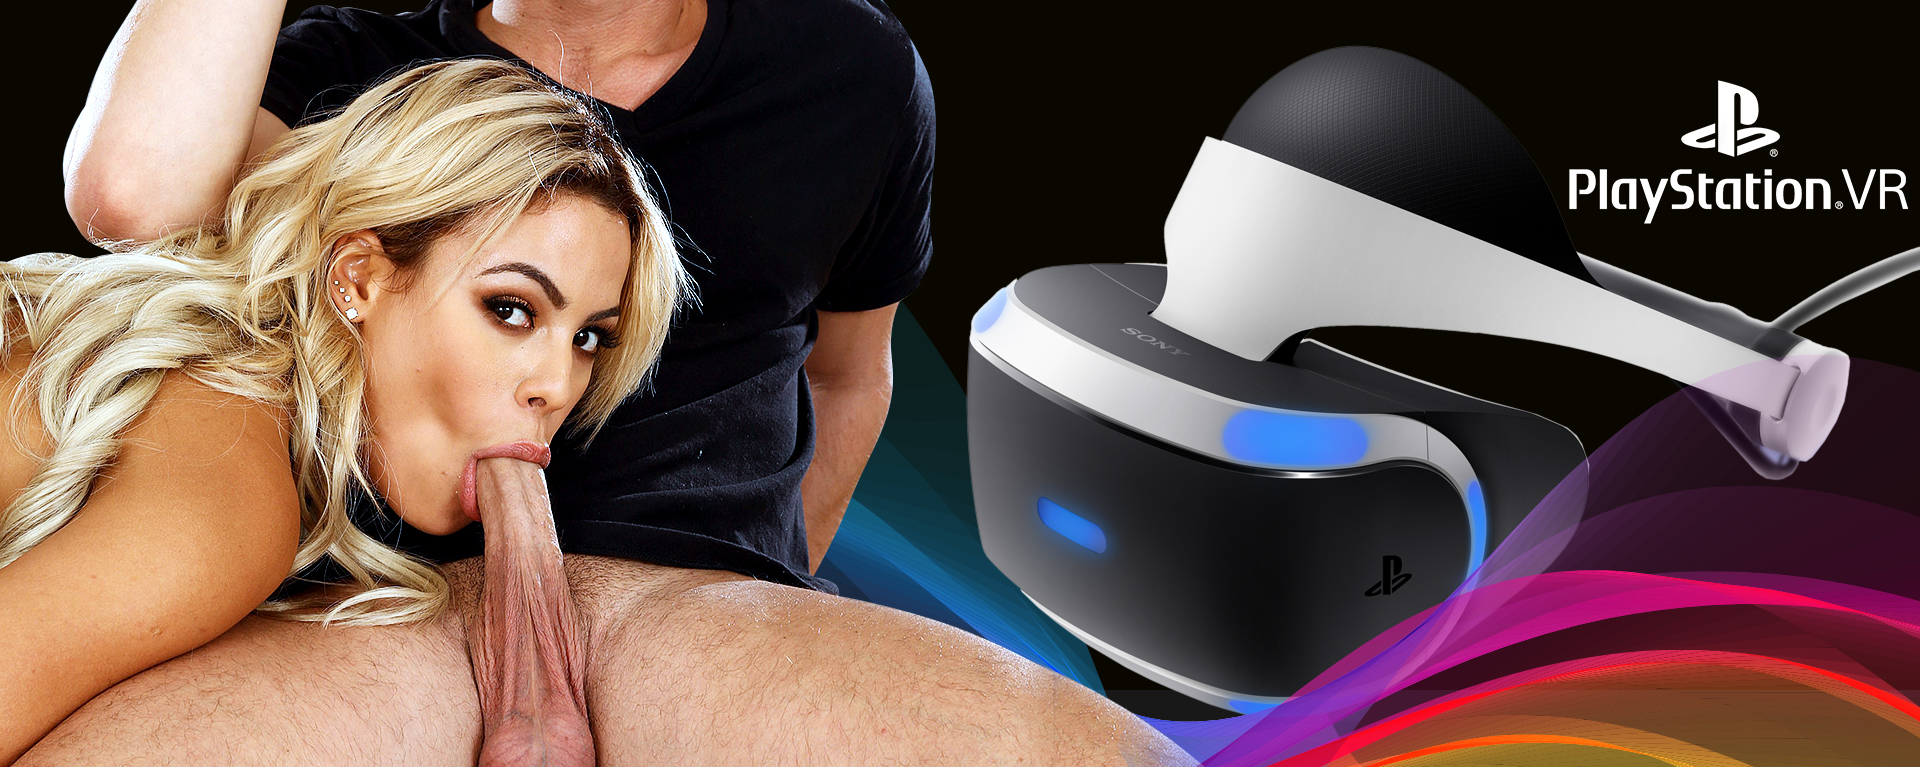 abe neal recommends ps4 vr porn games pic